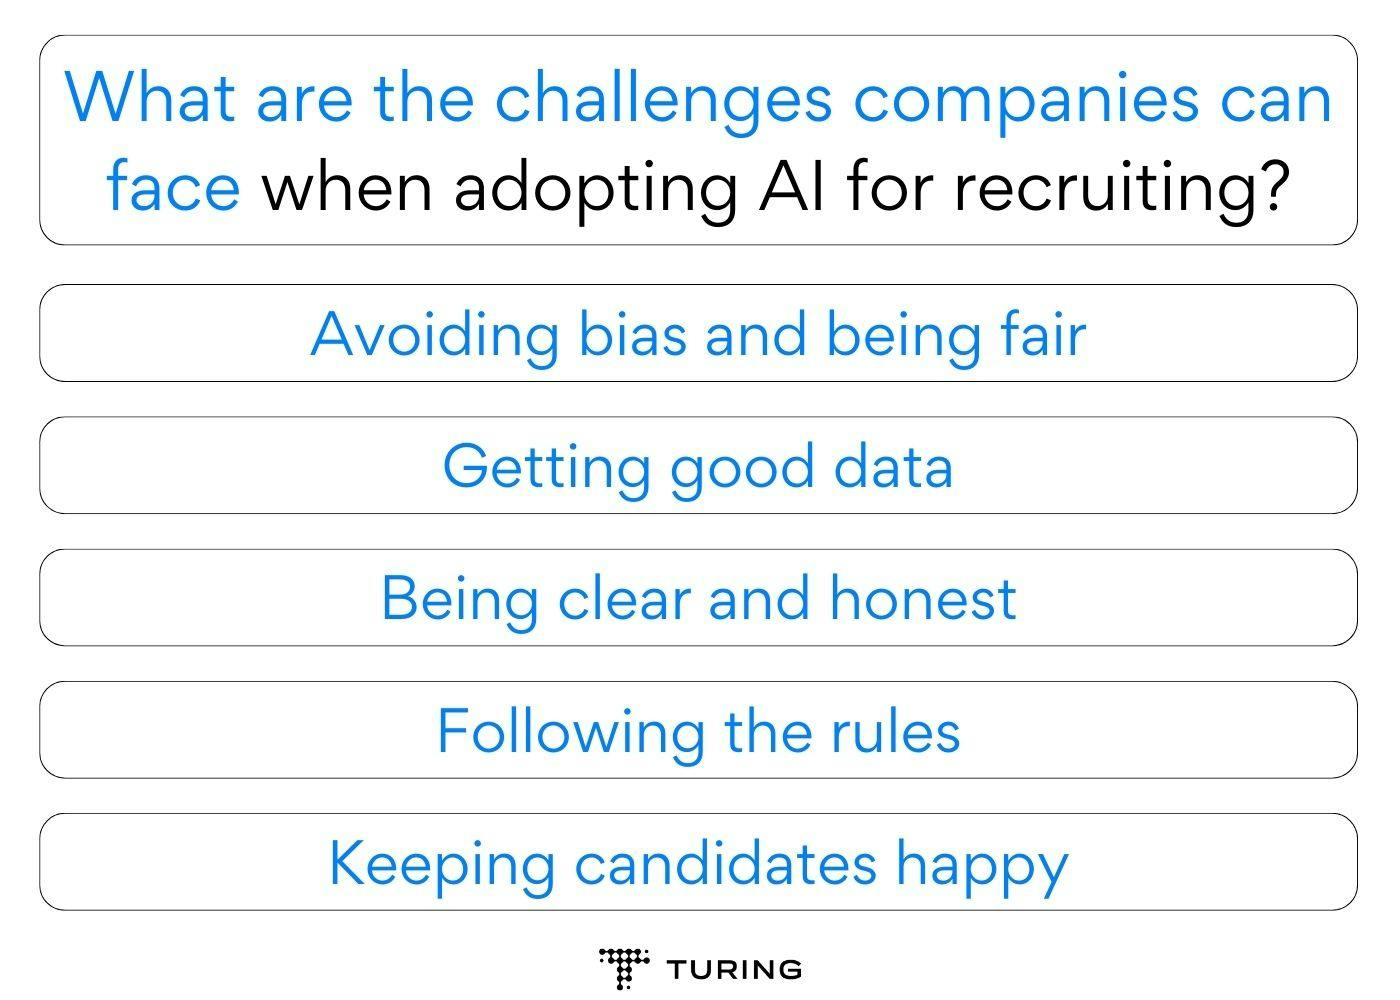 AI for recruiting: What are the challenges companies can face when adopting AI for recruiting